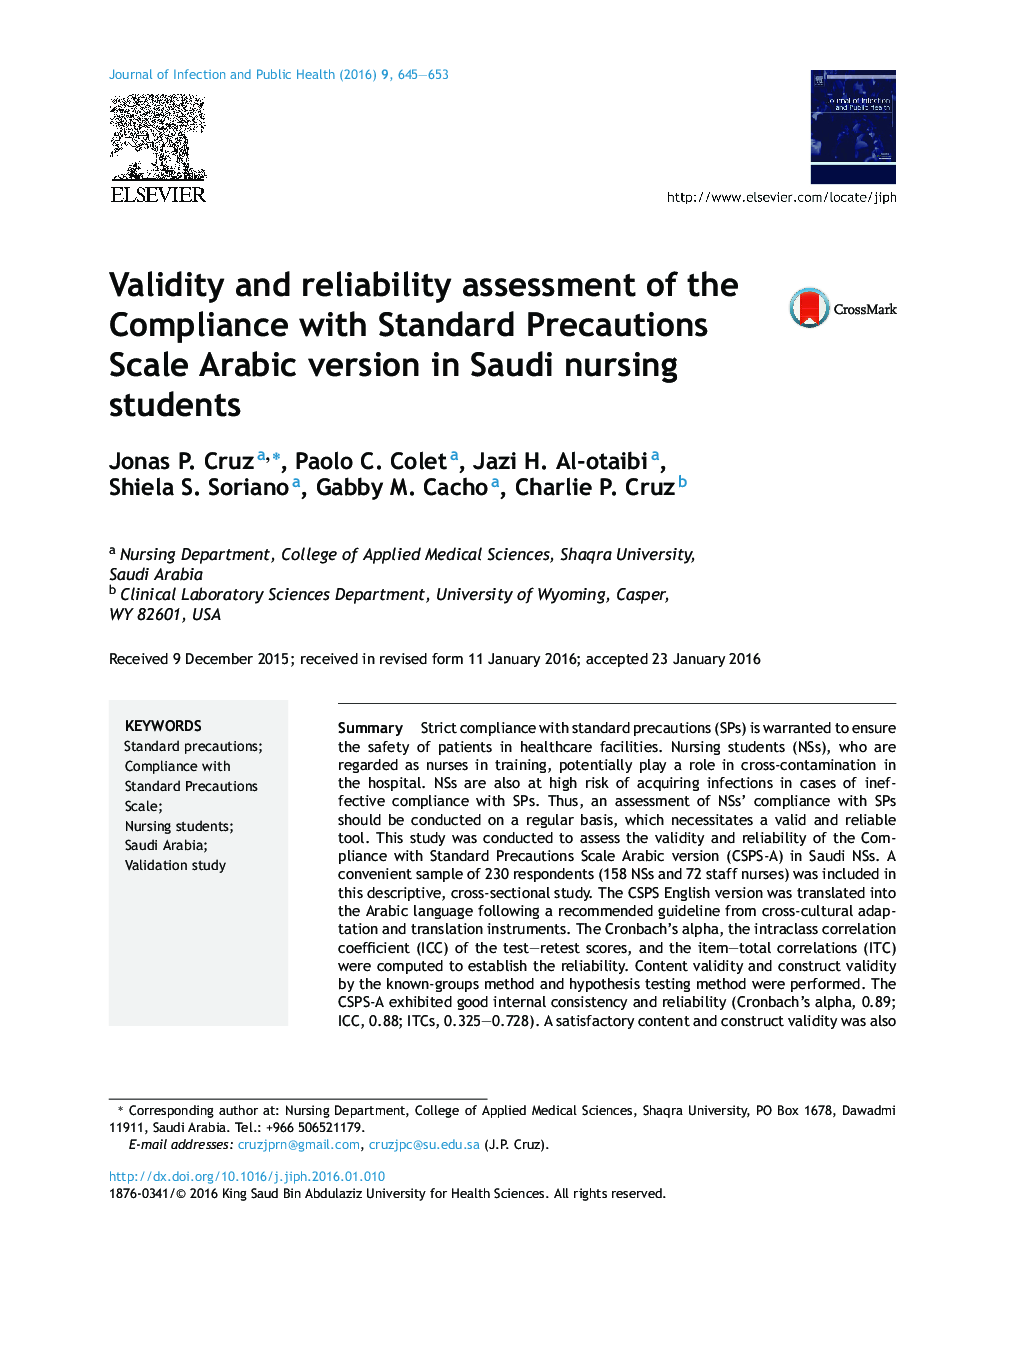 Validity and reliability assessment of the Compliance with Standard Precautions Scale Arabic version in Saudi nursing students